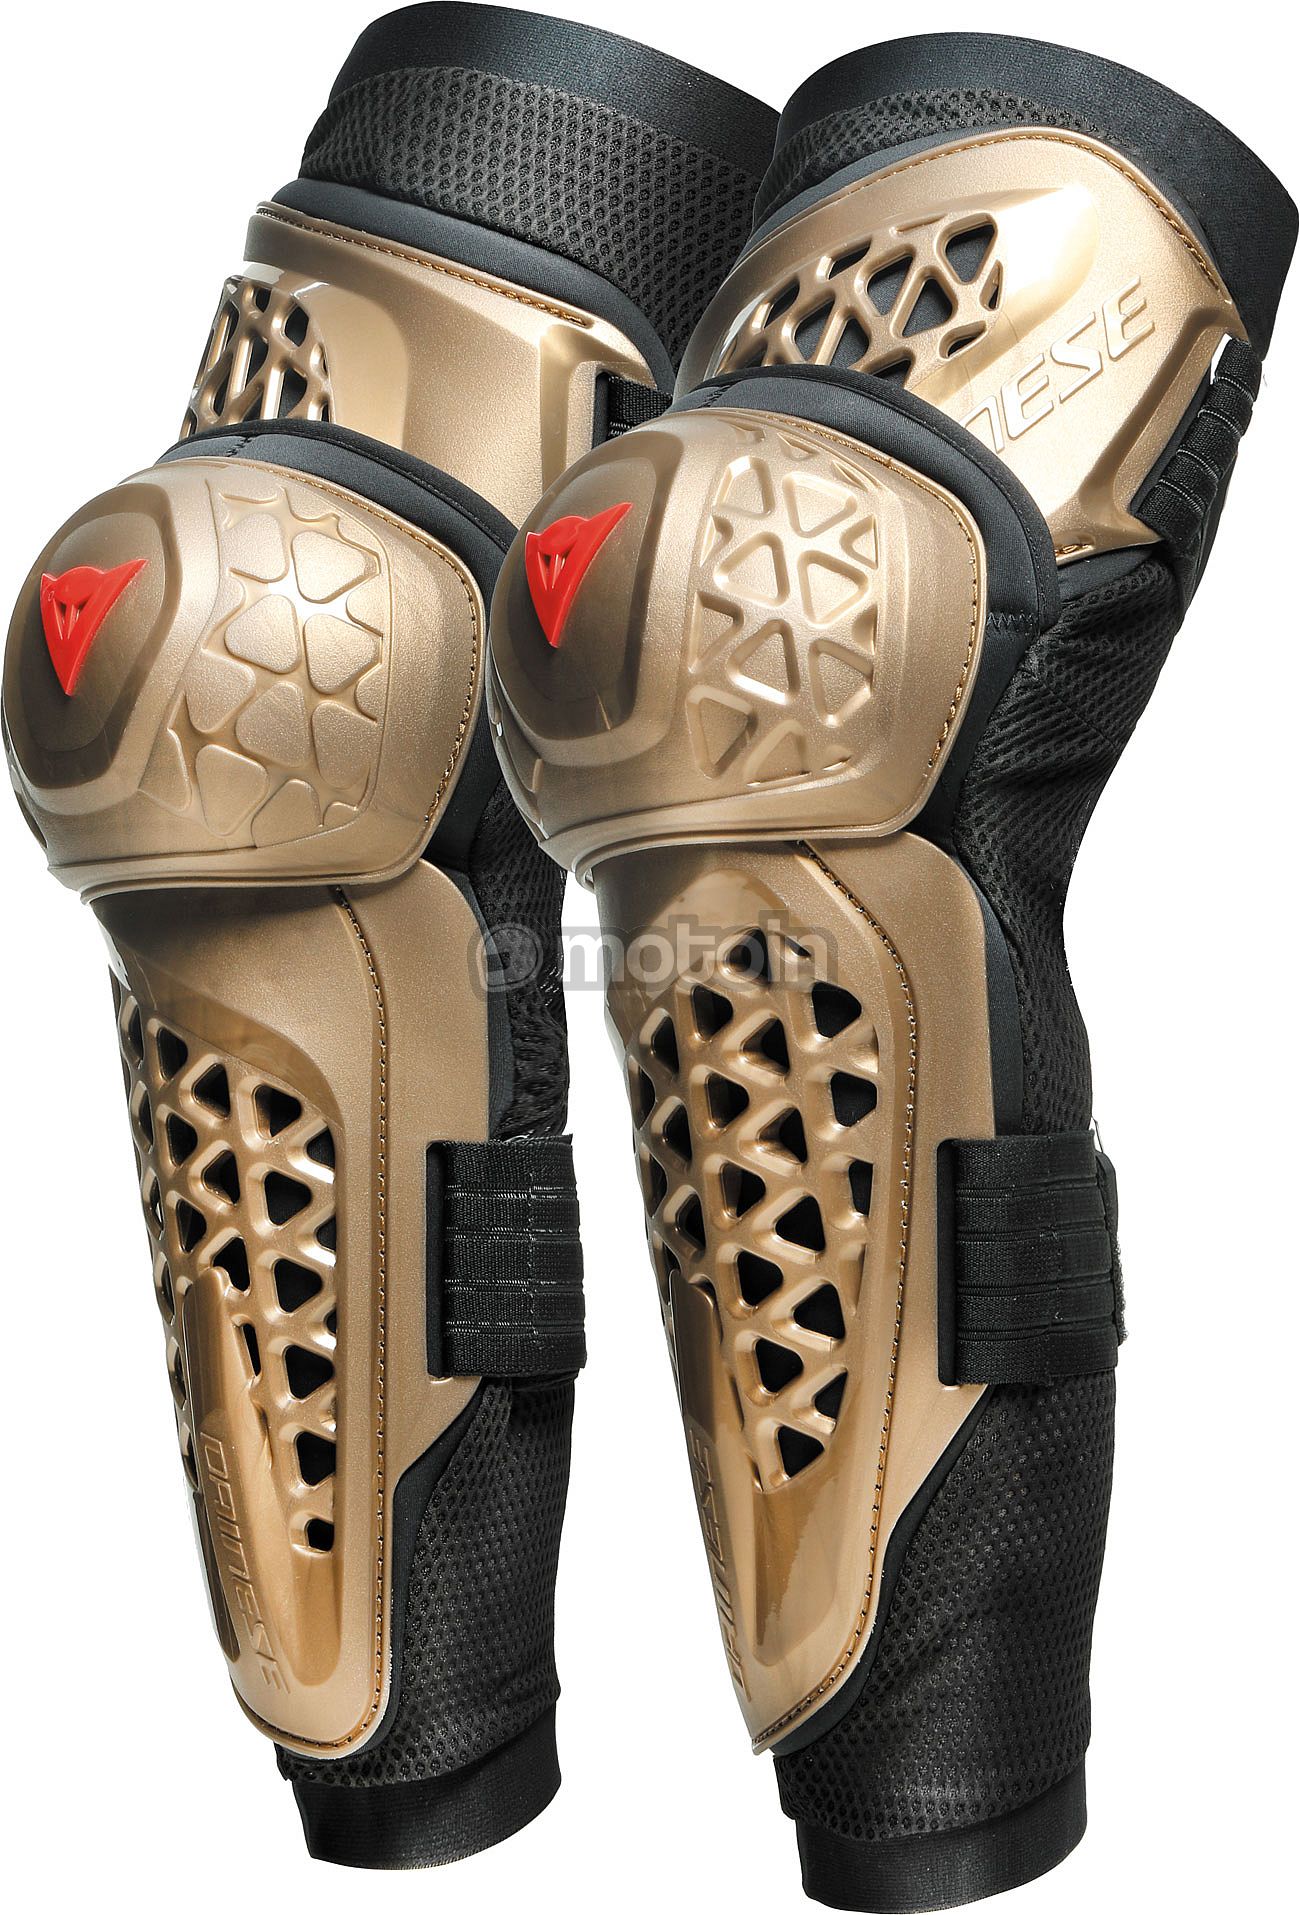 Protection Dainese - protège-coude armoform lite